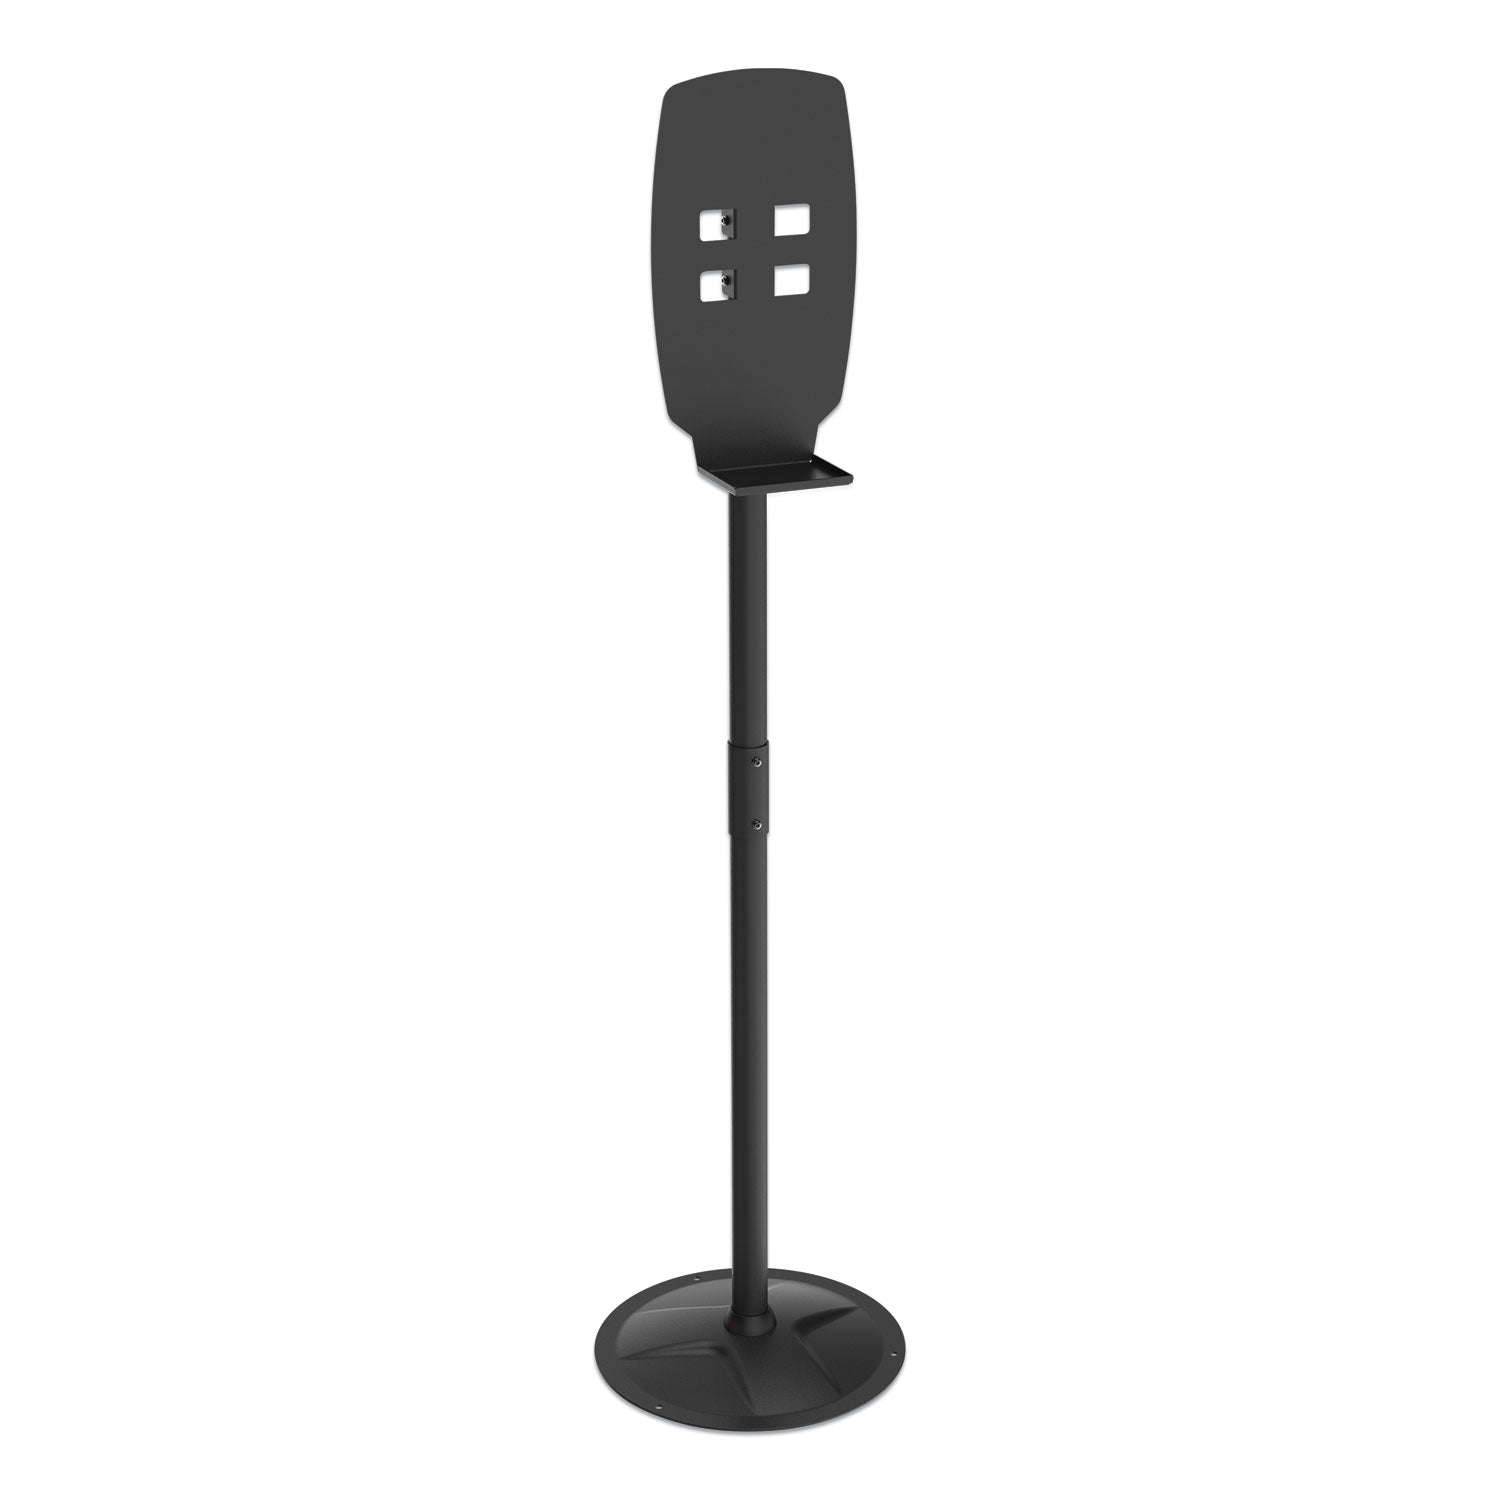 floor-stand-for-sanitizer-dispensers-height-adjustable-from-50-to-60-black_ktksd200 - 1